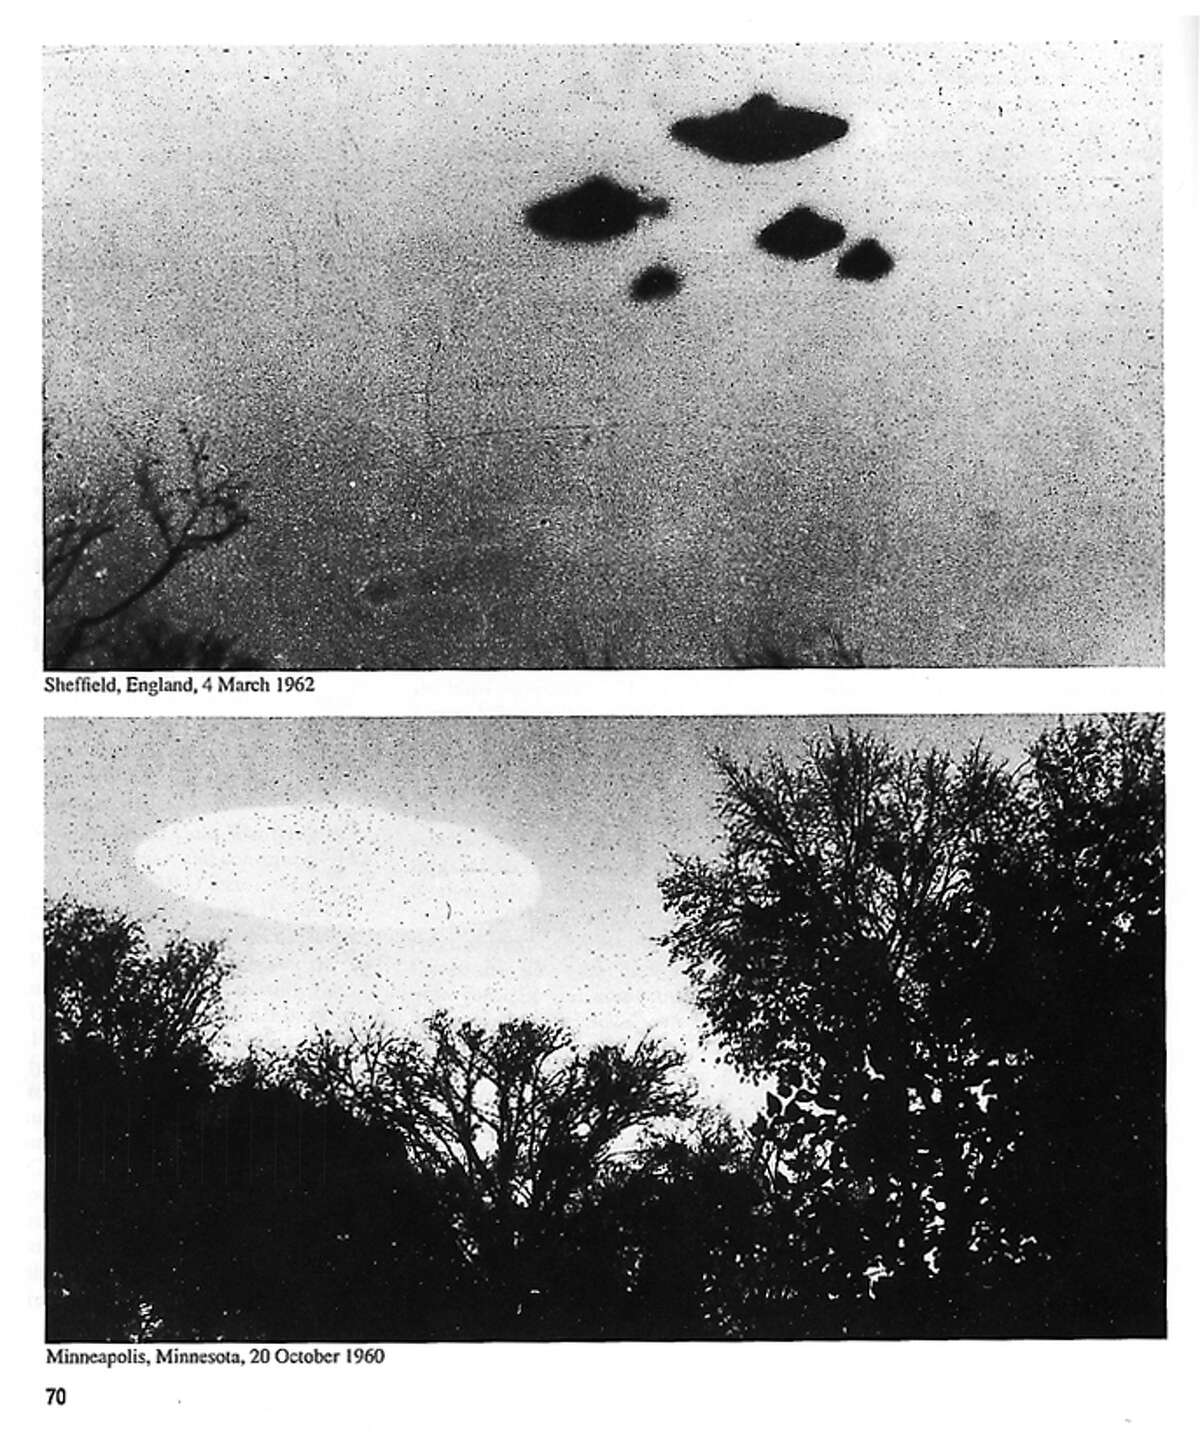 In 2016, the CIA published a story titled "Take a peek into our 'X-Files." The CIA’s top five reports that could help you believe in UFOs: Click through for the list. This photo was taken from the same CIA website. The only info are the labels. The top photo says “Sheffield, England, 4 March 1962” and the bottom says “Minneapolis, Minnesota, 20 October 1960.”